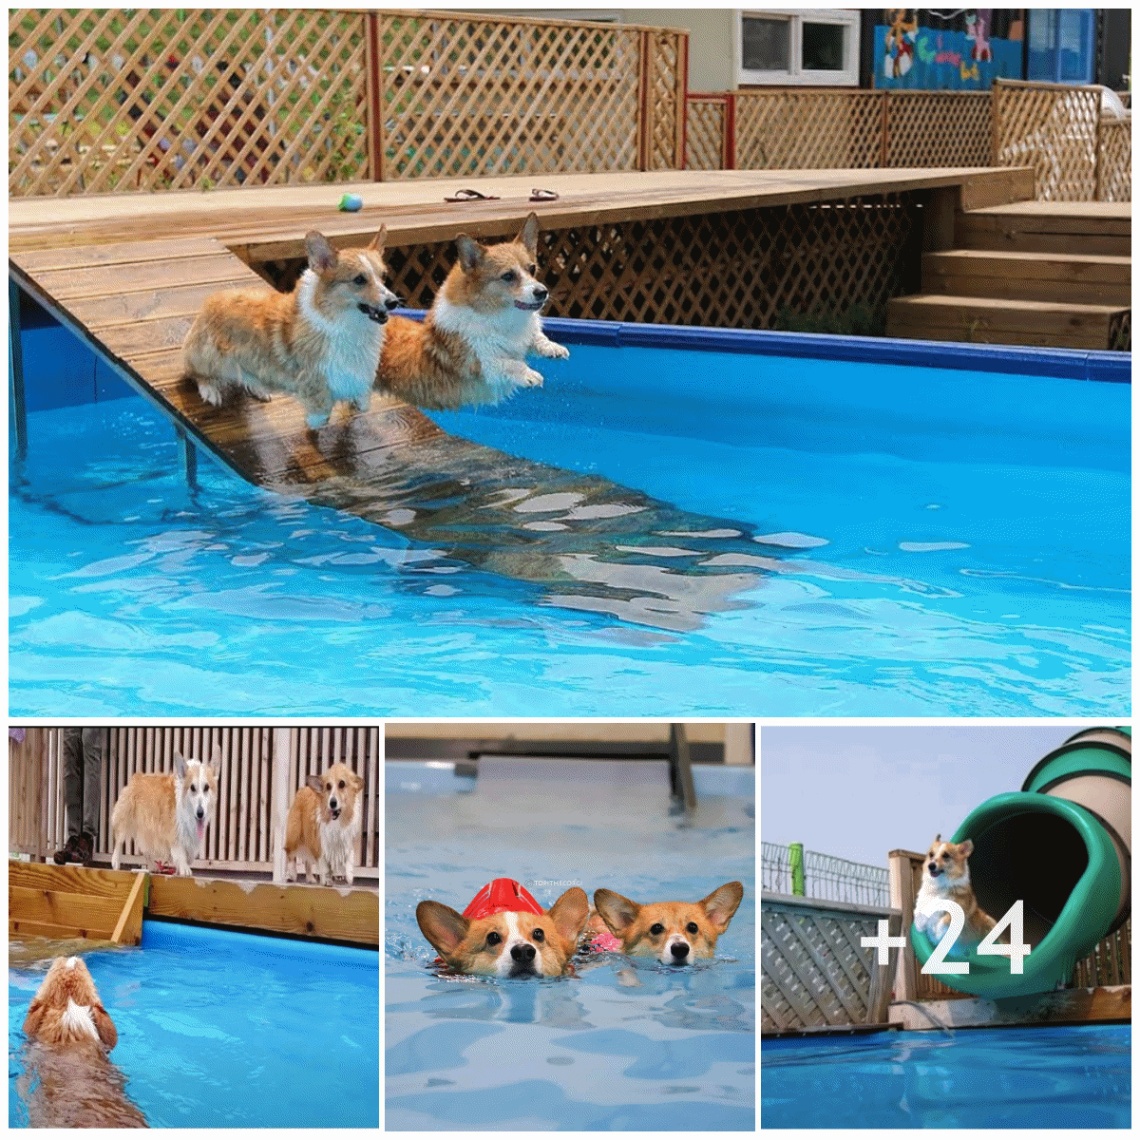 “Corgi Dog Pool Party: Dogs enjoy fun adventures with water splashes and water slides, fun adorable moments”